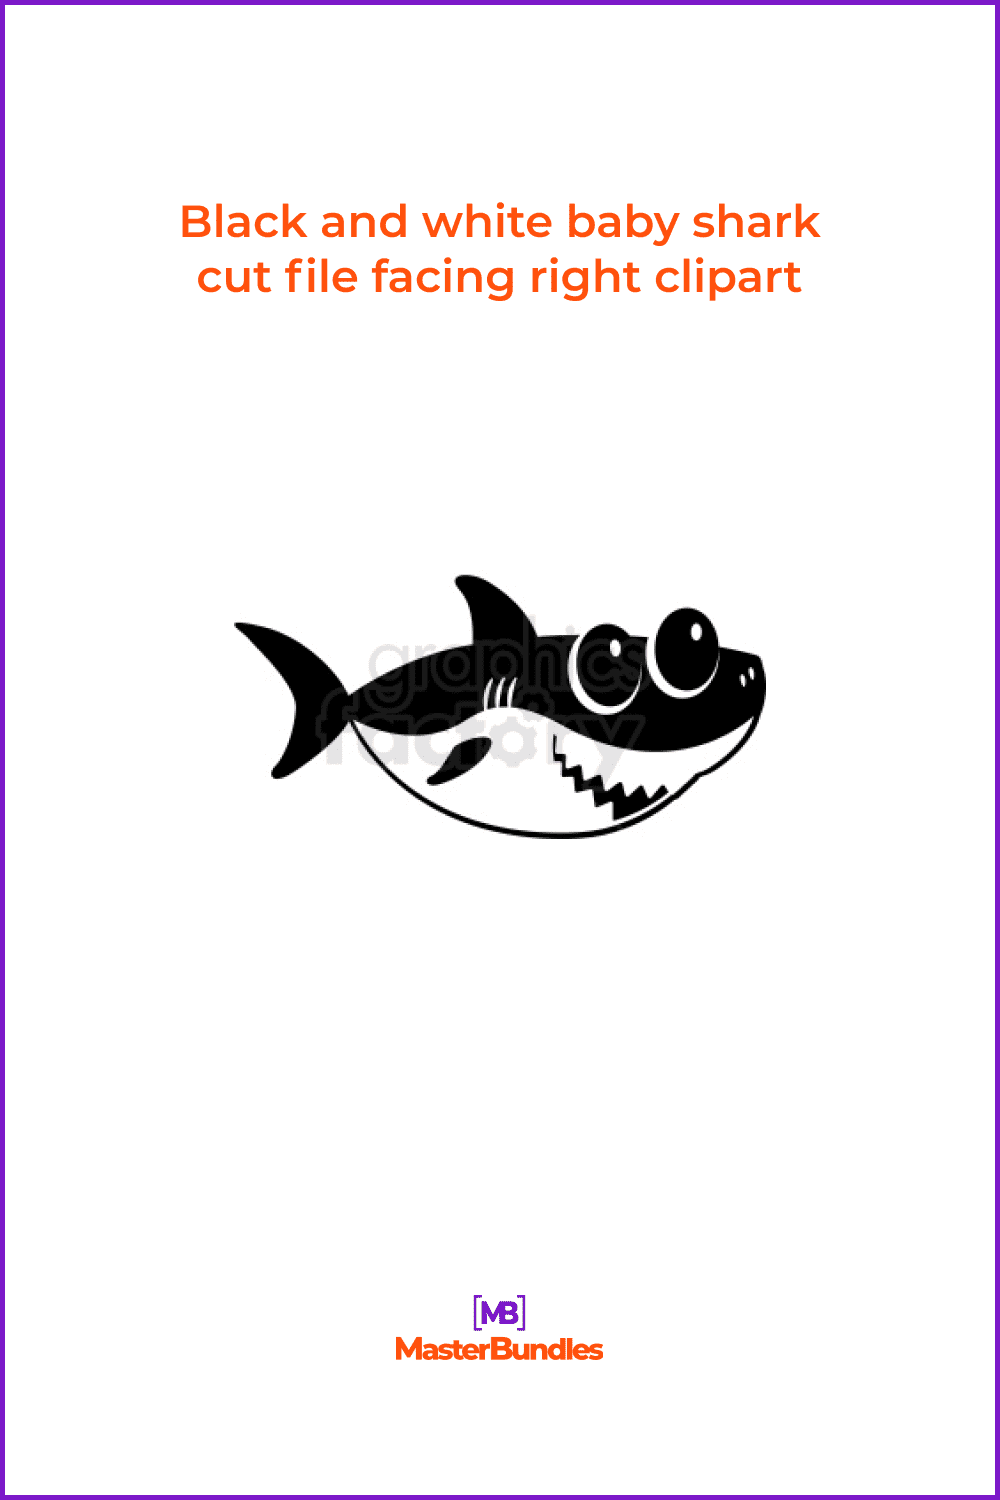 Black and white baby shark cut file facing right clipart.